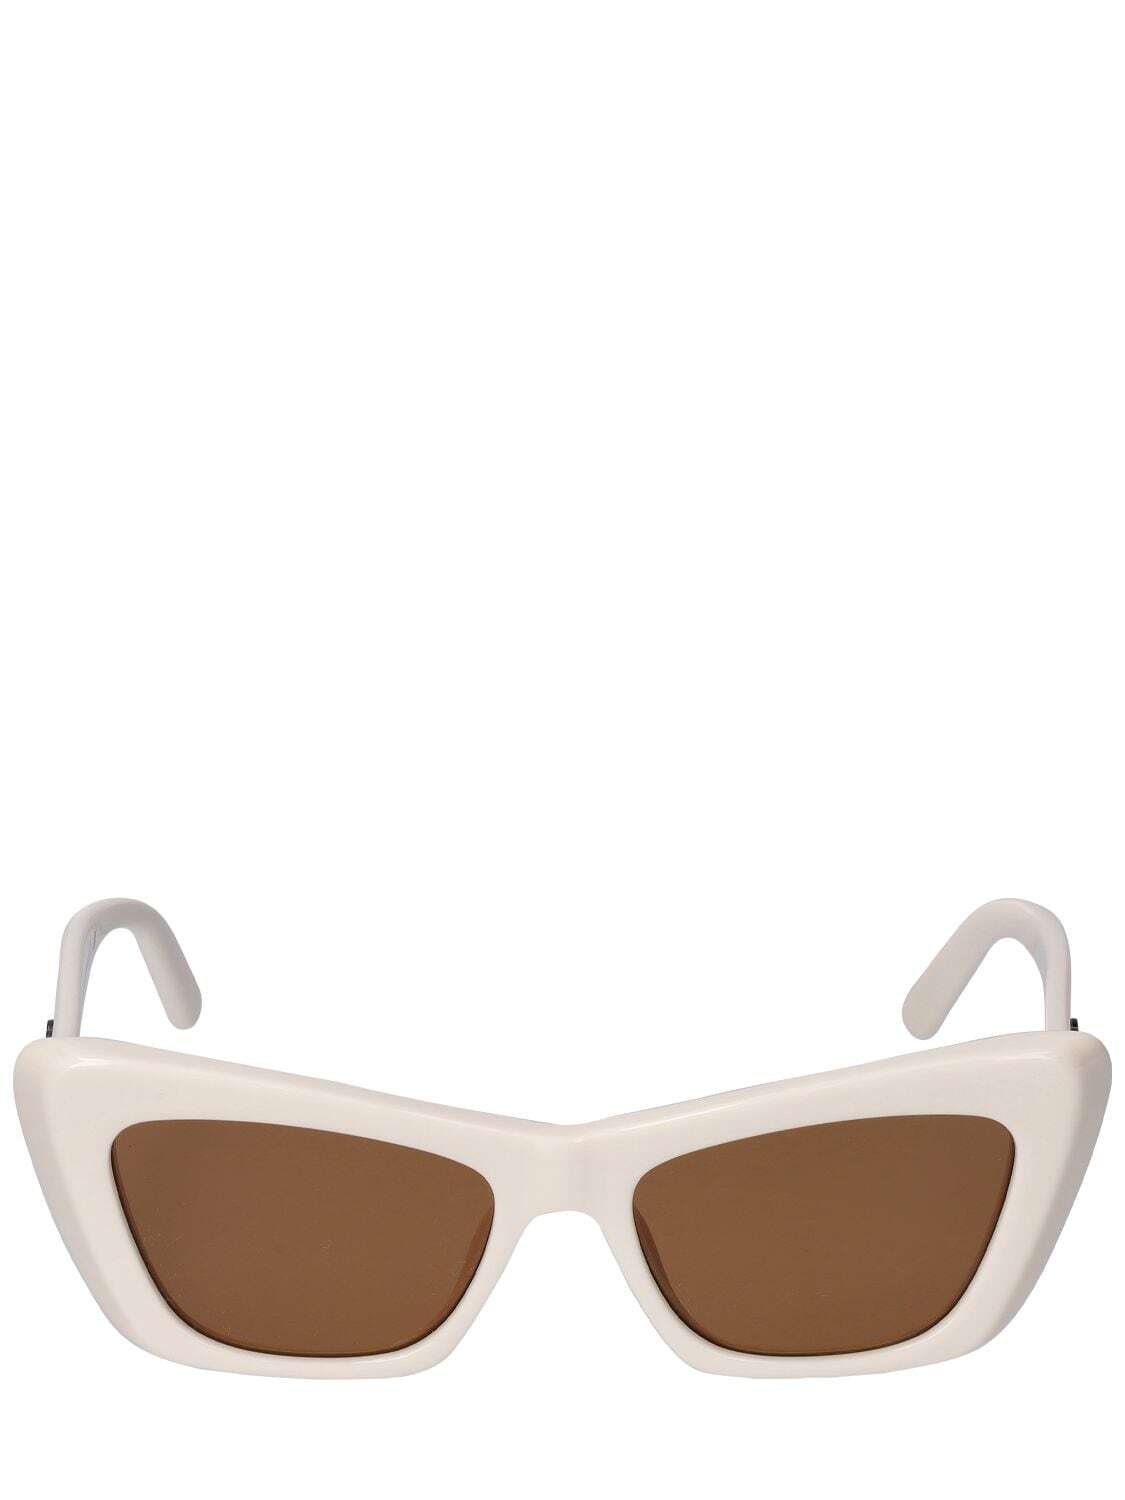 PALM ANGELS Hermosa Cat-eye Acetate Sunglasses in brown / white